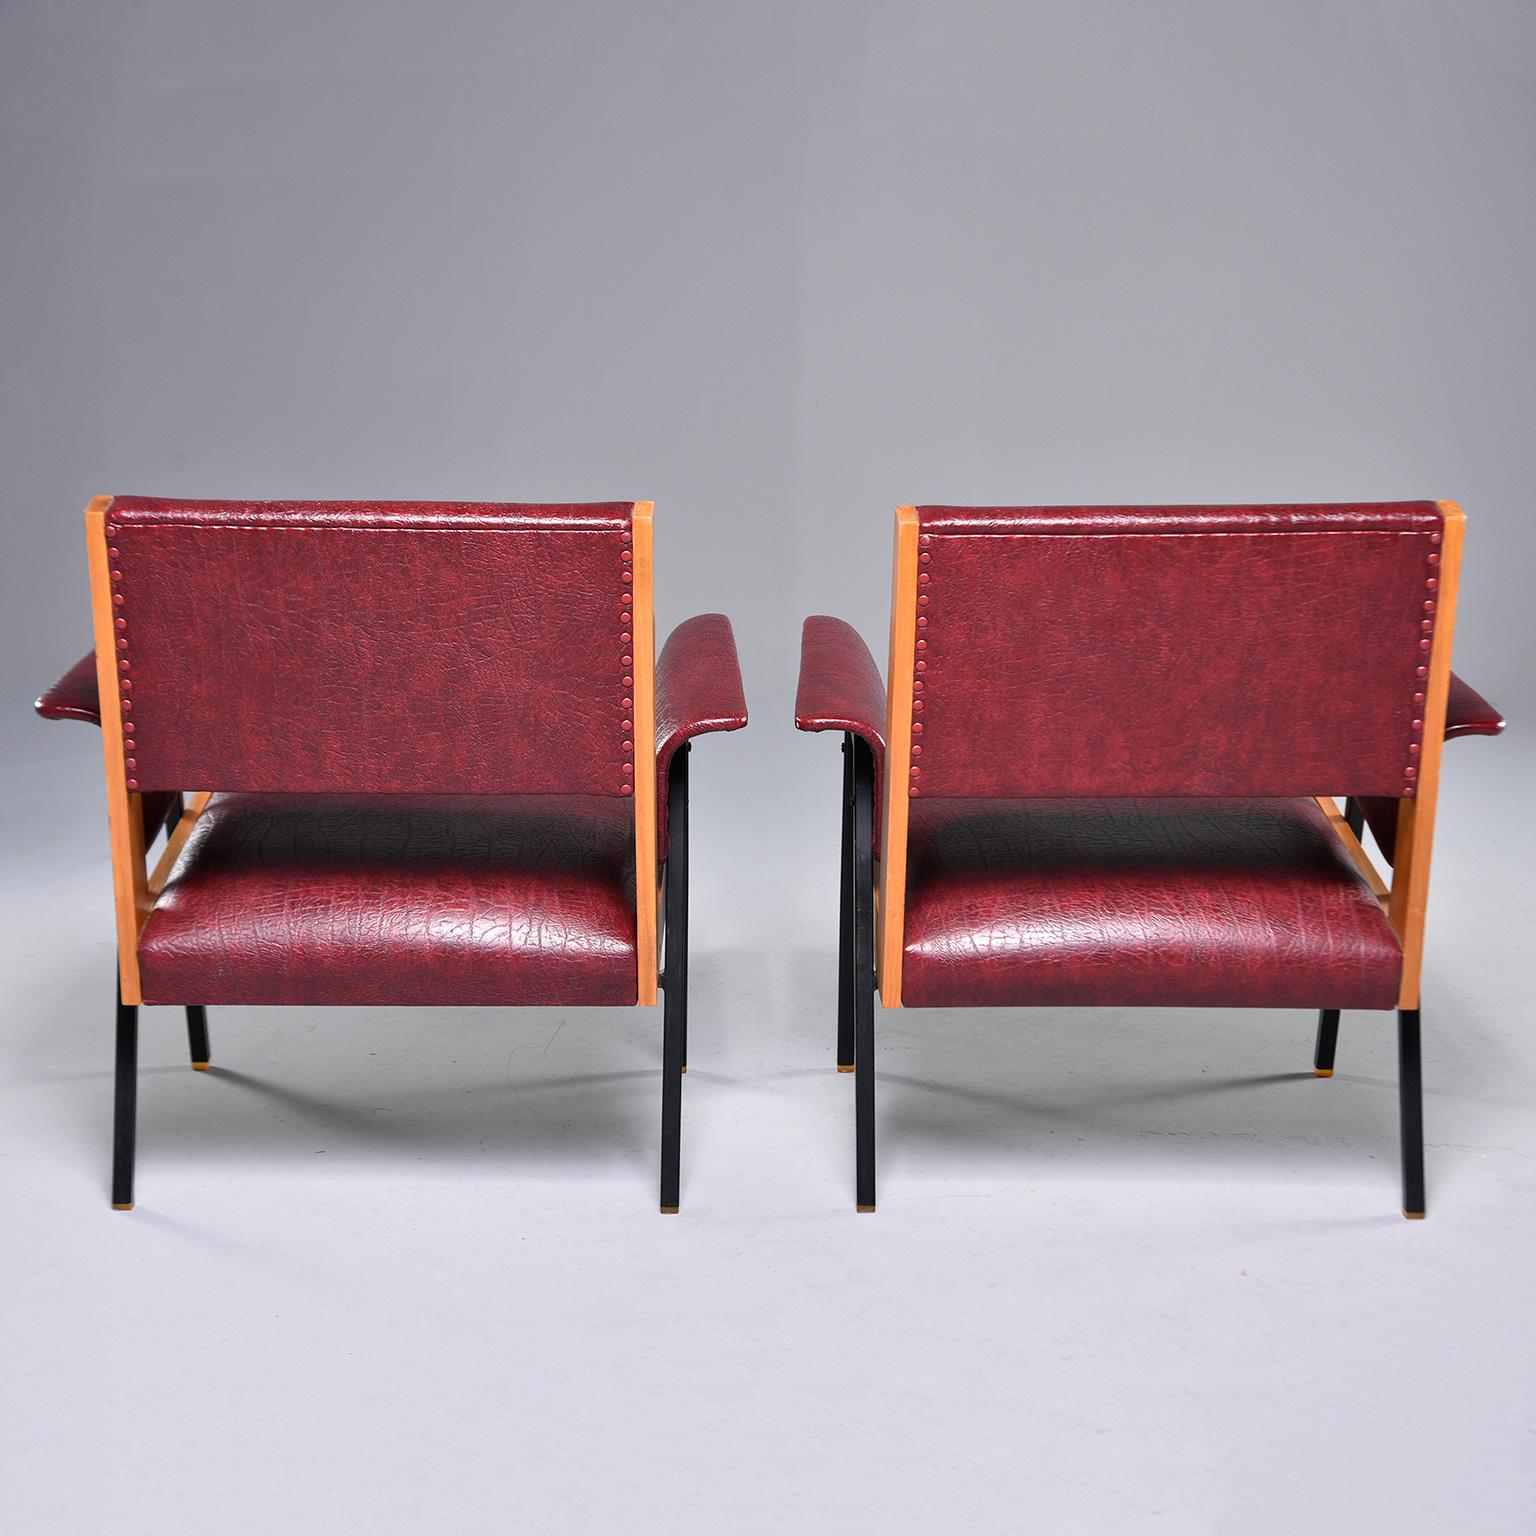 20th Century Pair of Midcentury Armchairs with Wood Frames and Metal Legs